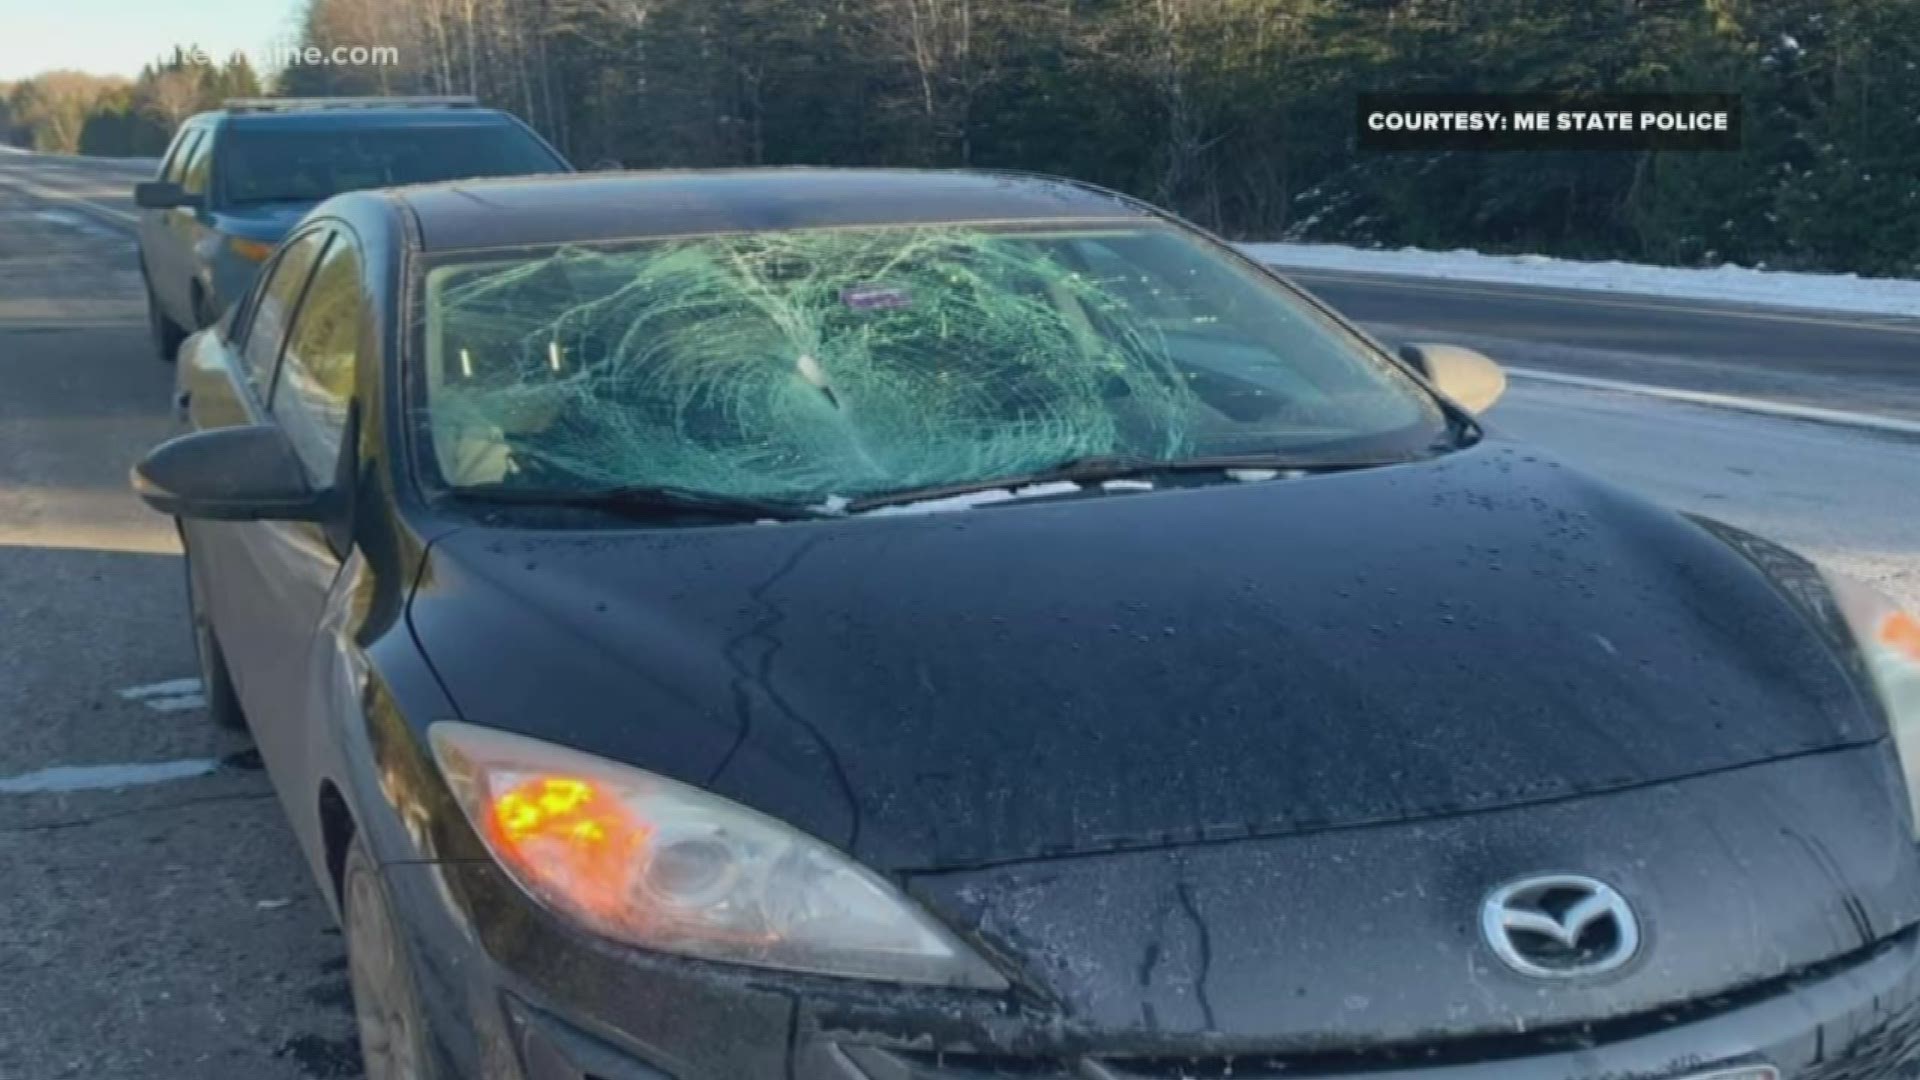 A friendly reminder to clean the ice off your car before hitting the road.